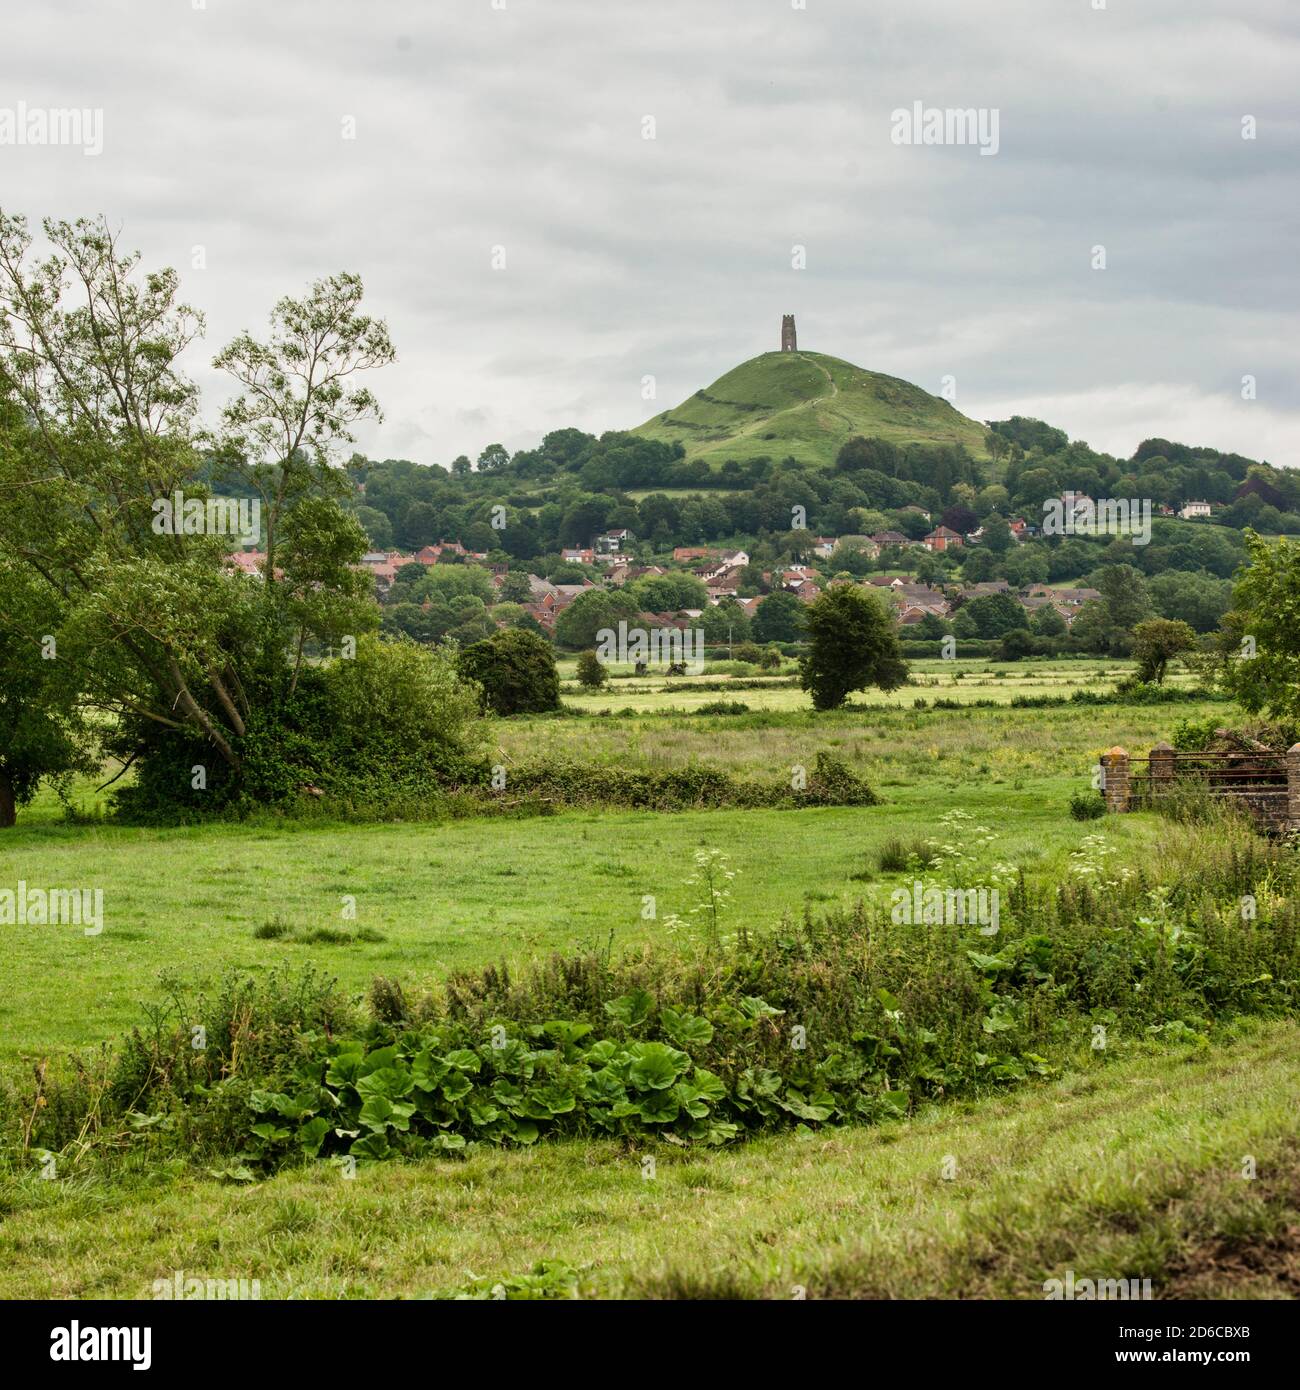 Glastonbury Tor in the distance, center frame, overlooking Glastonbury township. Farmland garden planting crosses foreground. No people. Copy space. Stock Photo